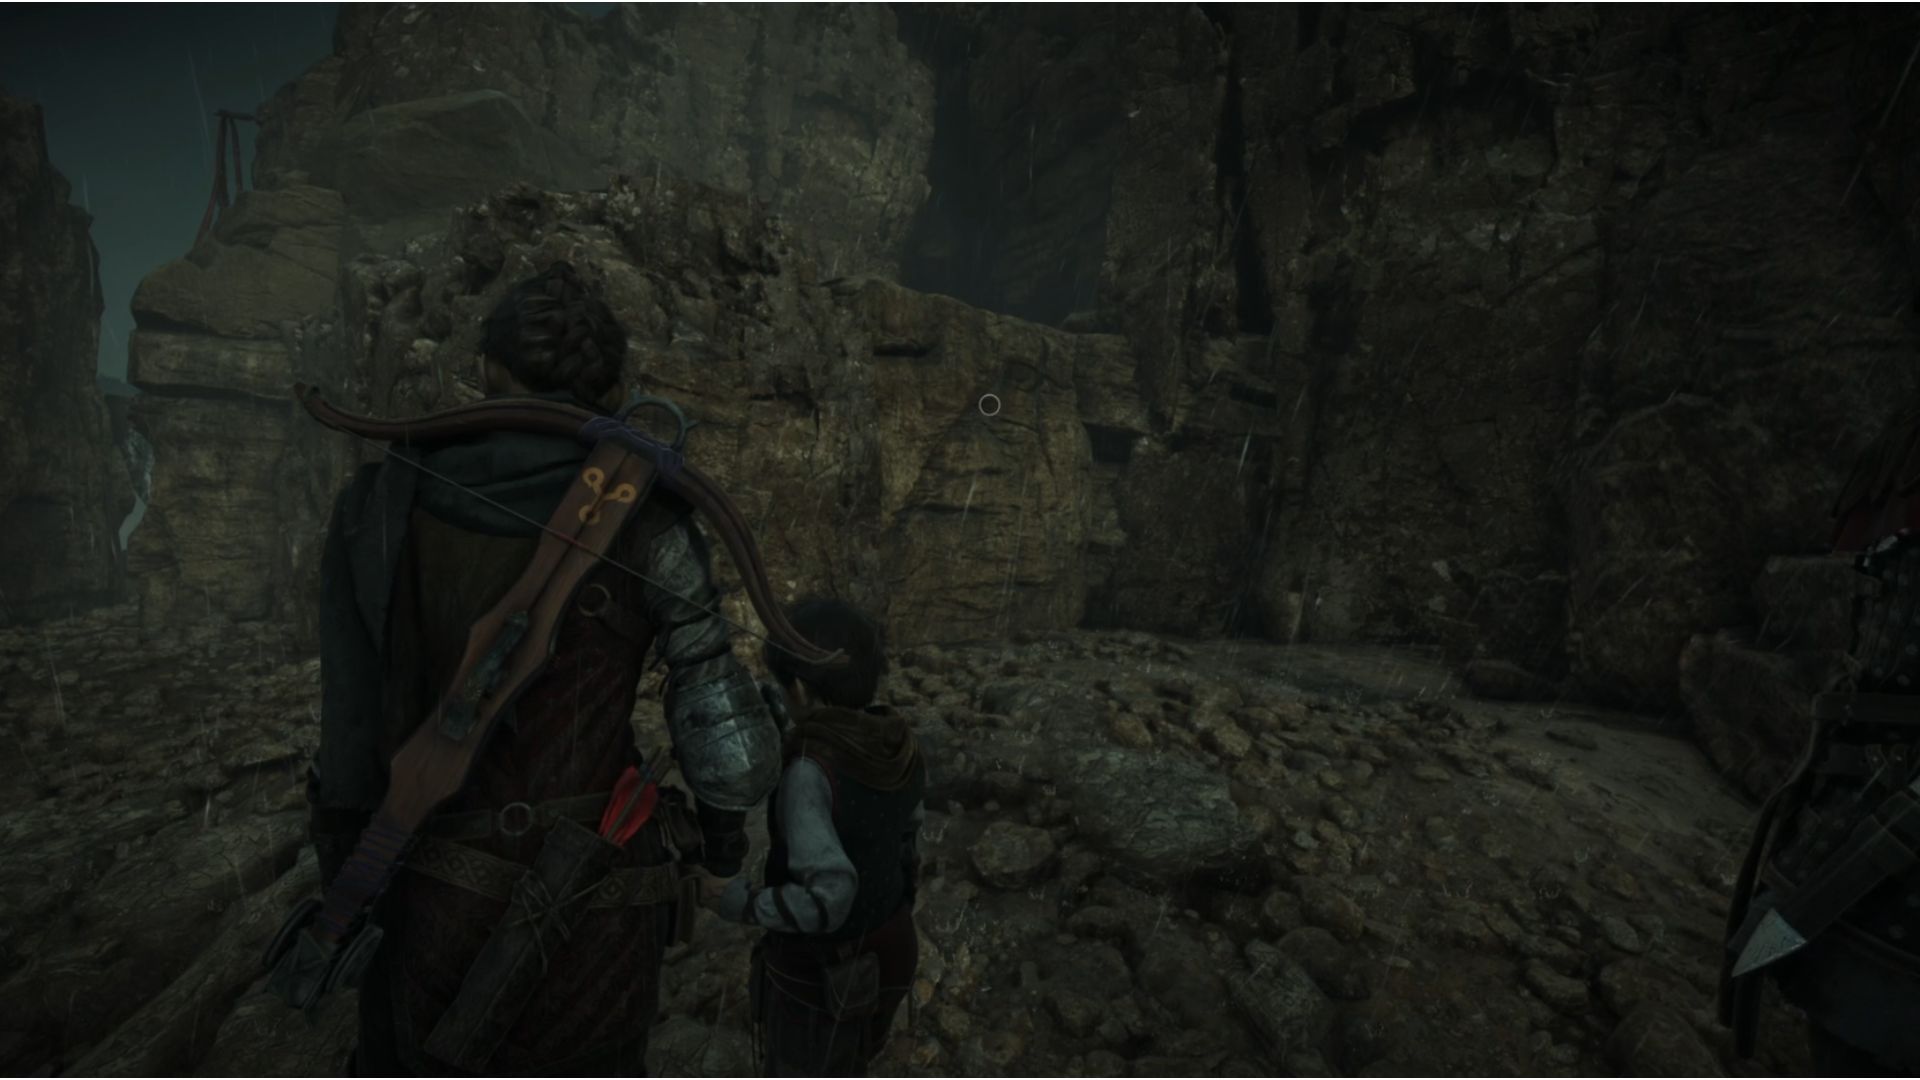 A Plague Tale Requiem Collectibles: The path up to the cave can be seen